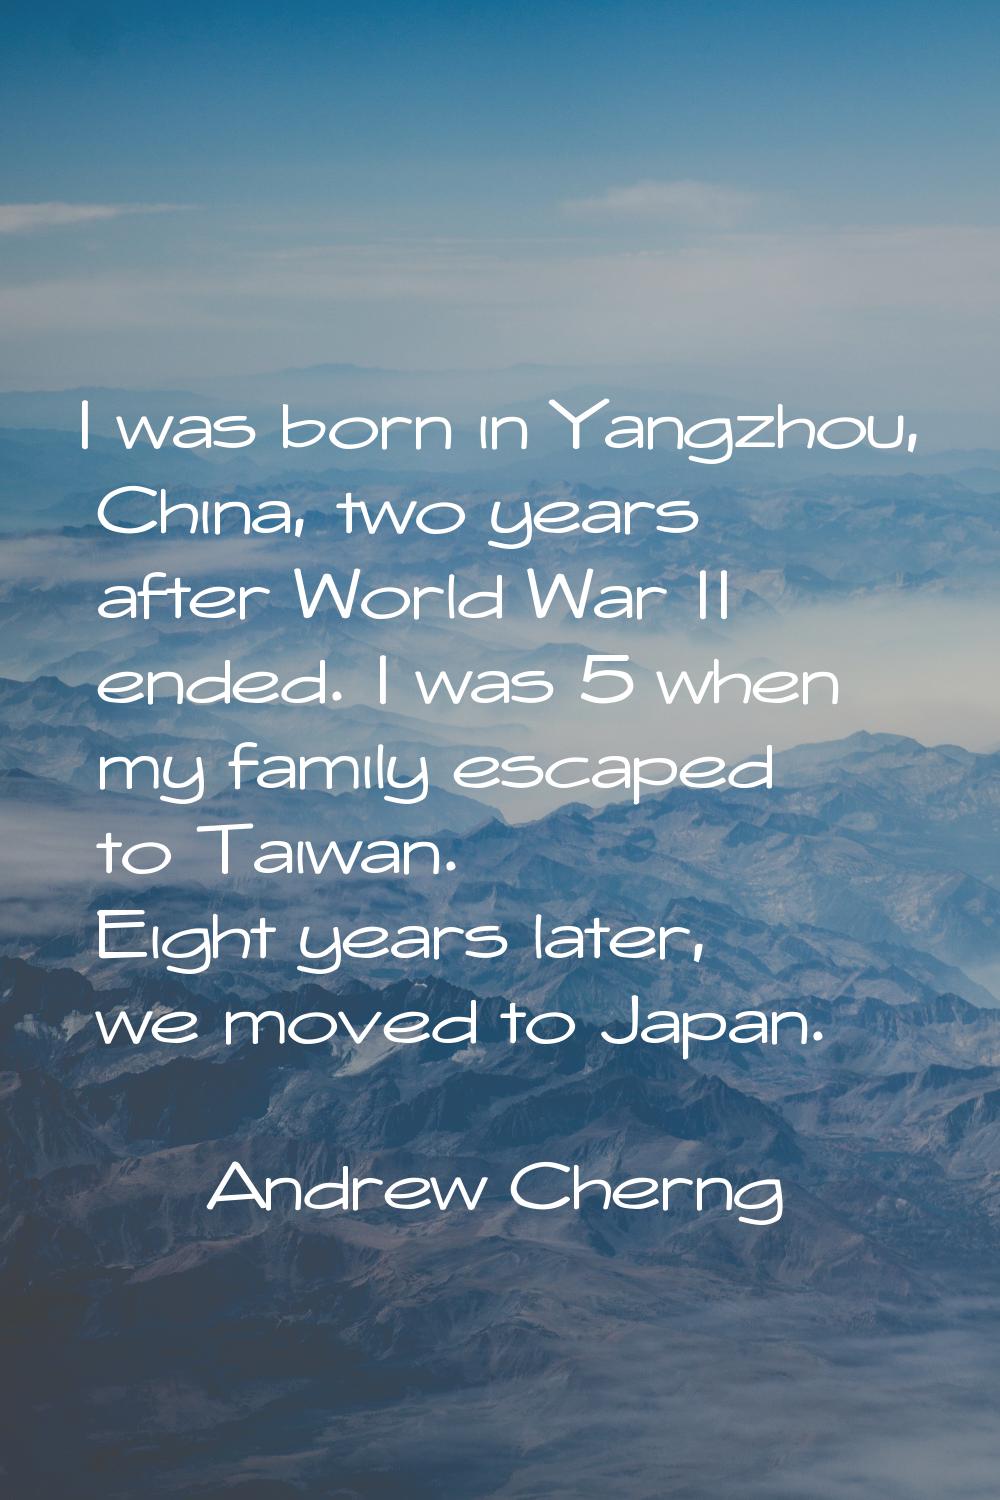 I was born in Yangzhou, China, two years after World War II ended. I was 5 when my family escaped t